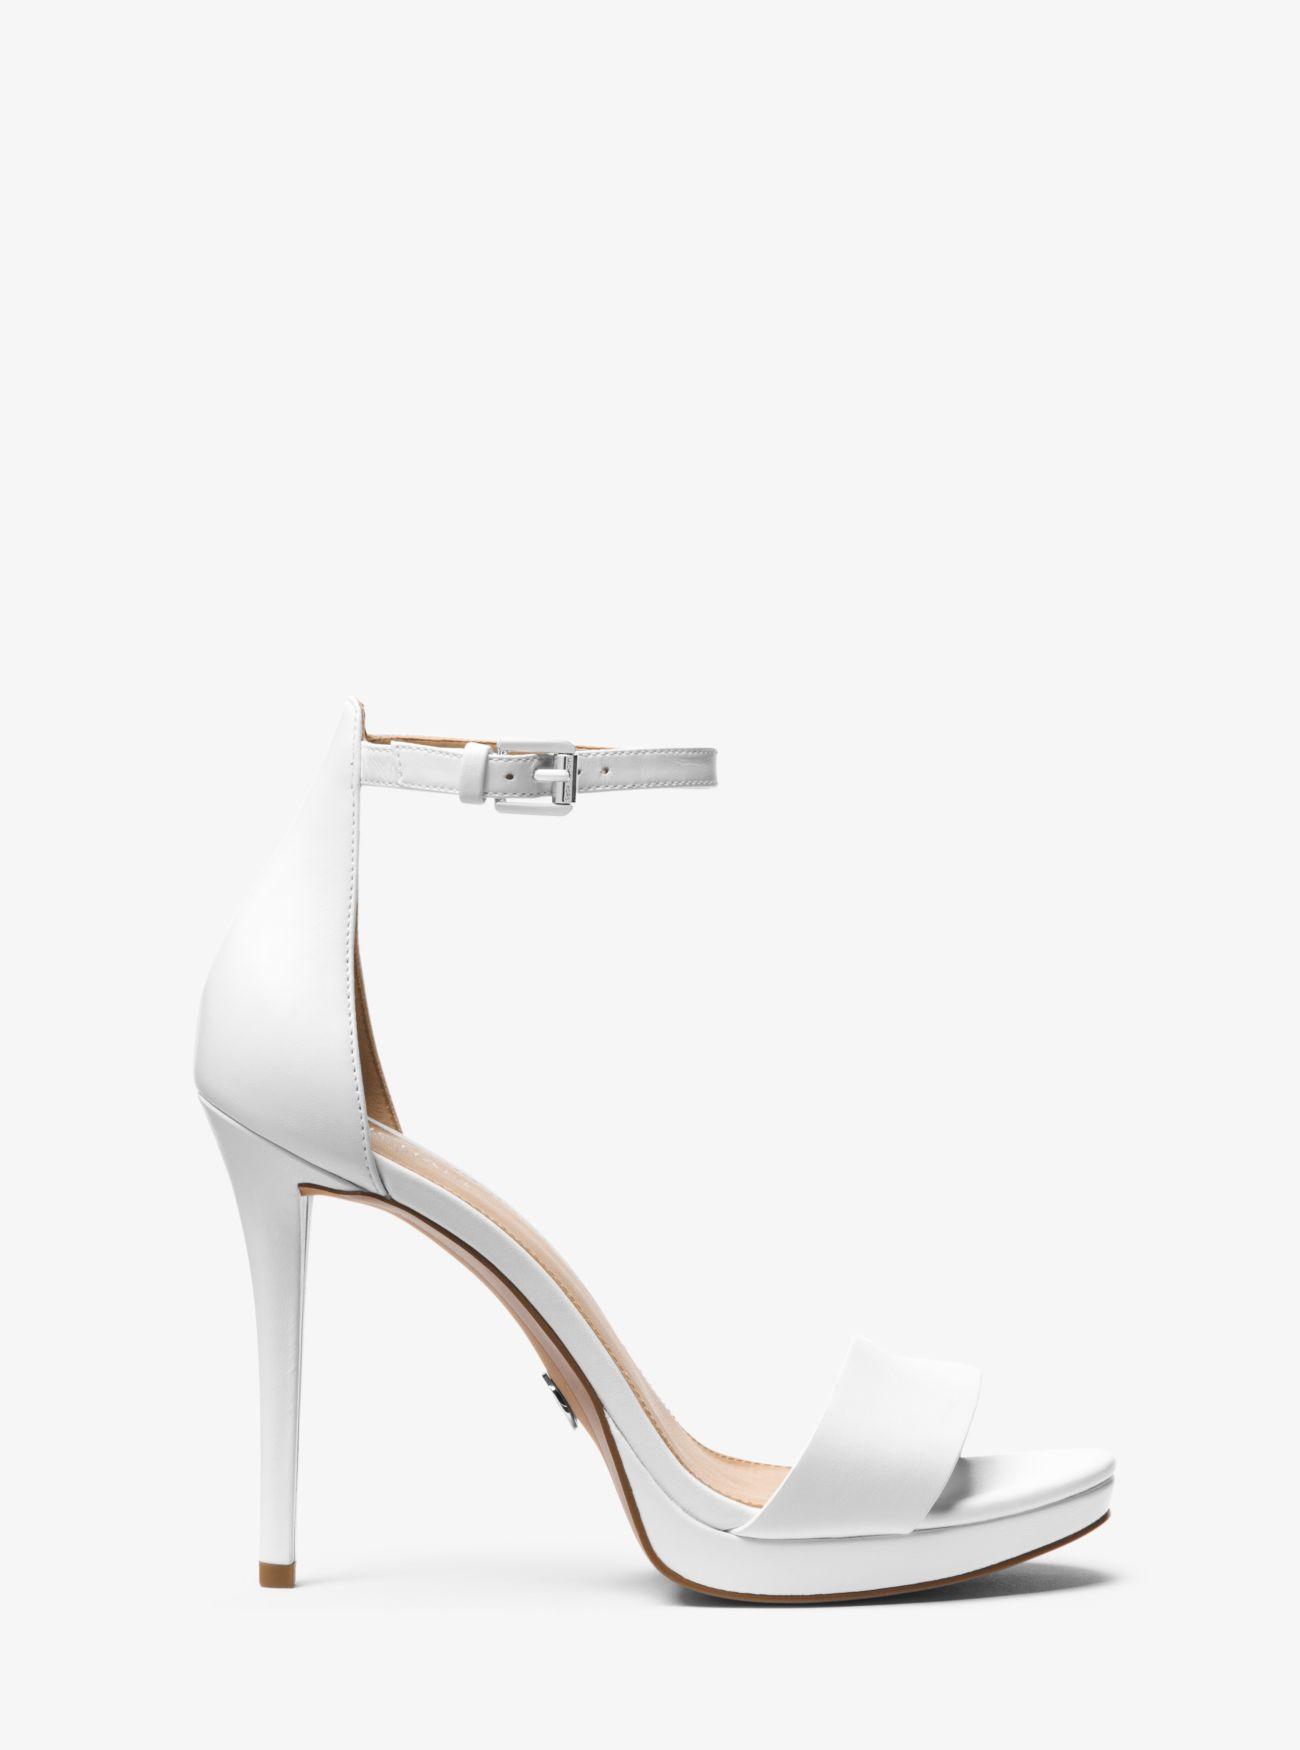 Michael Kors Hutton Leather Sandal in 